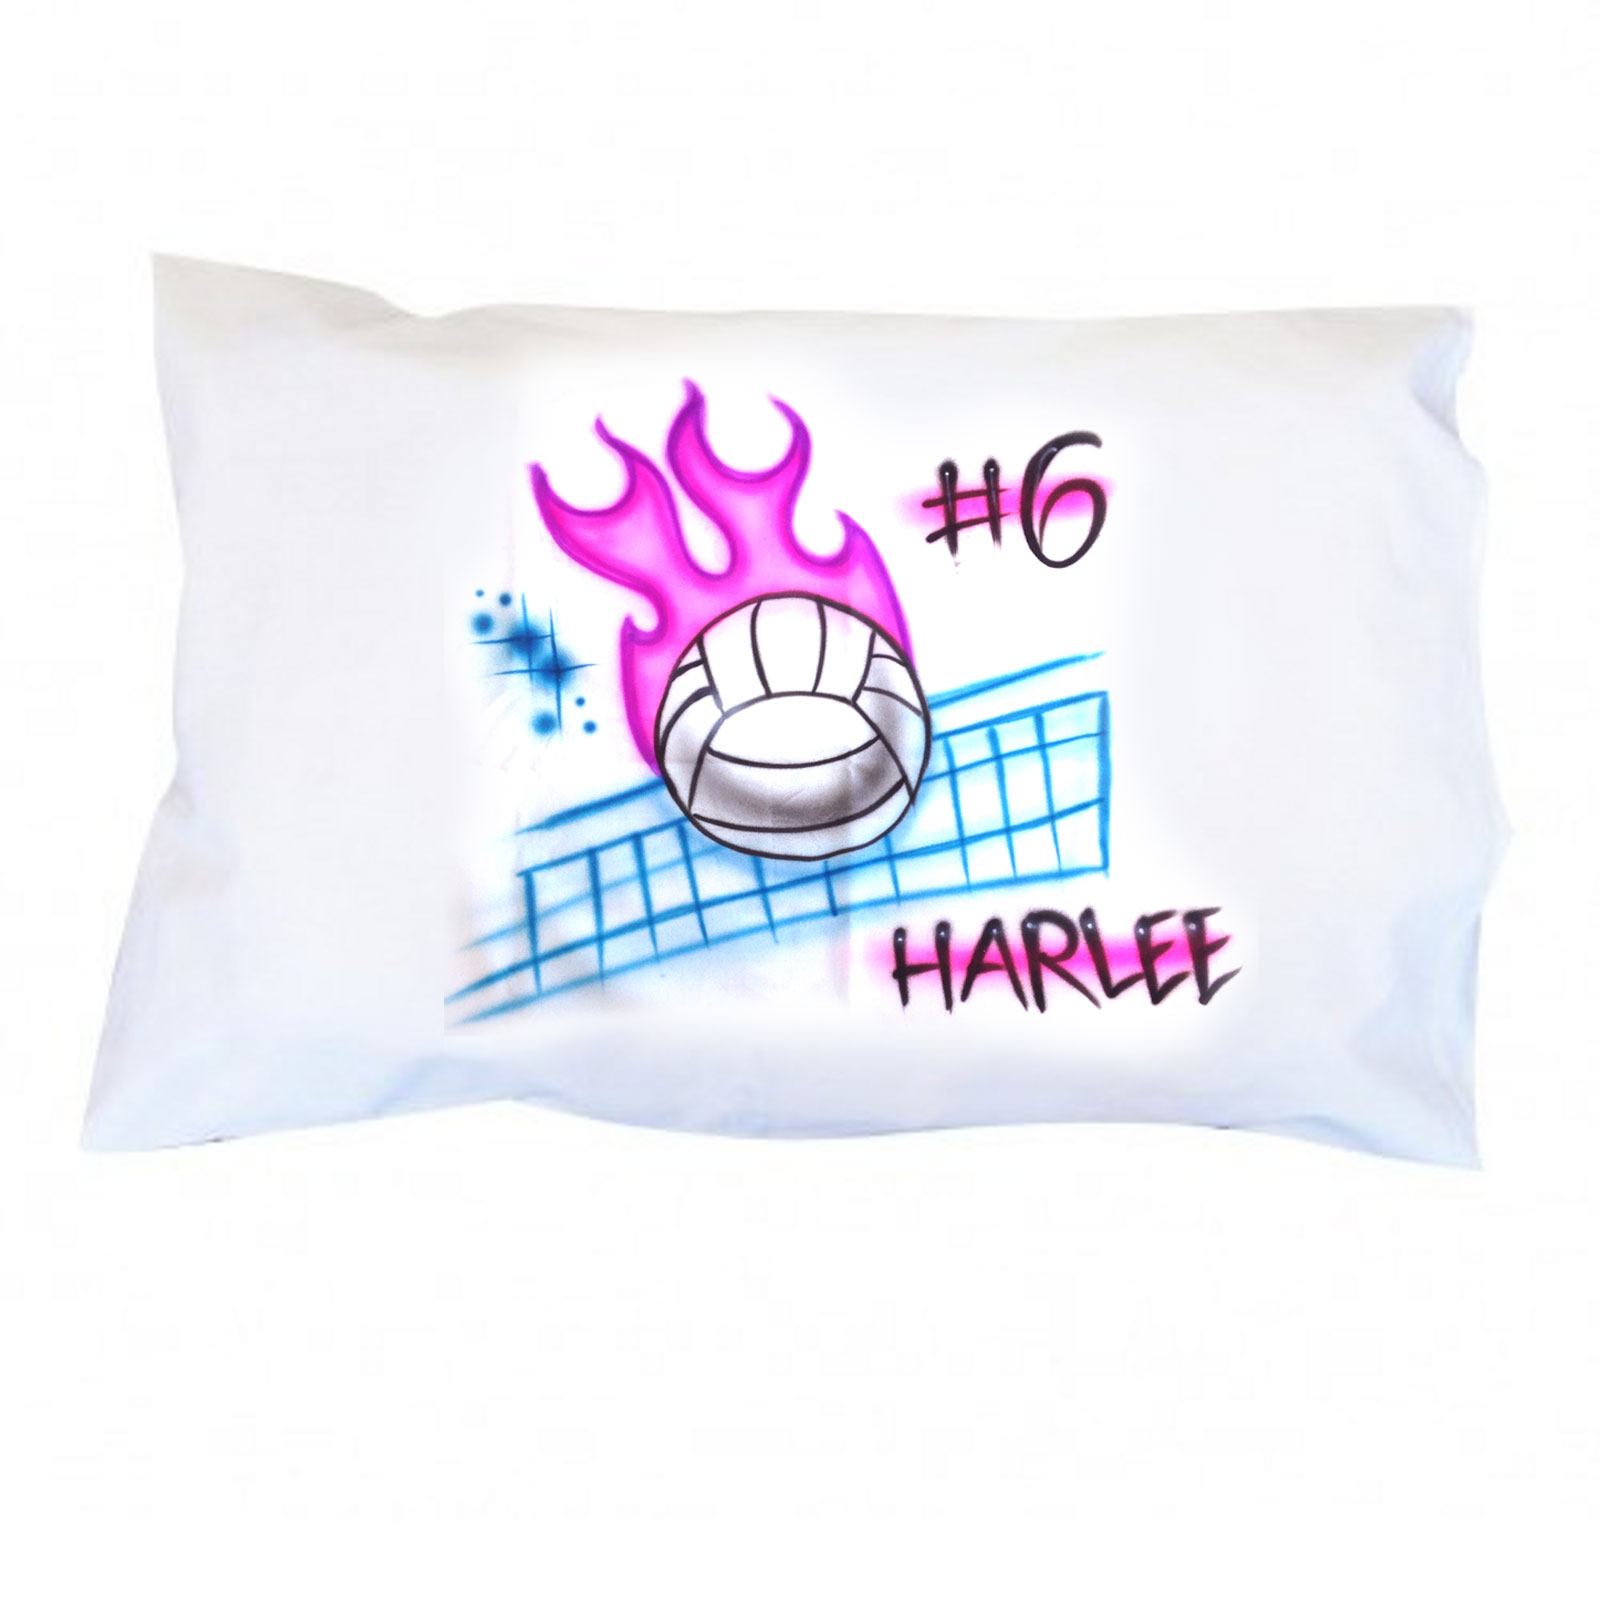 Personalized pillow case with flaming volleyball design